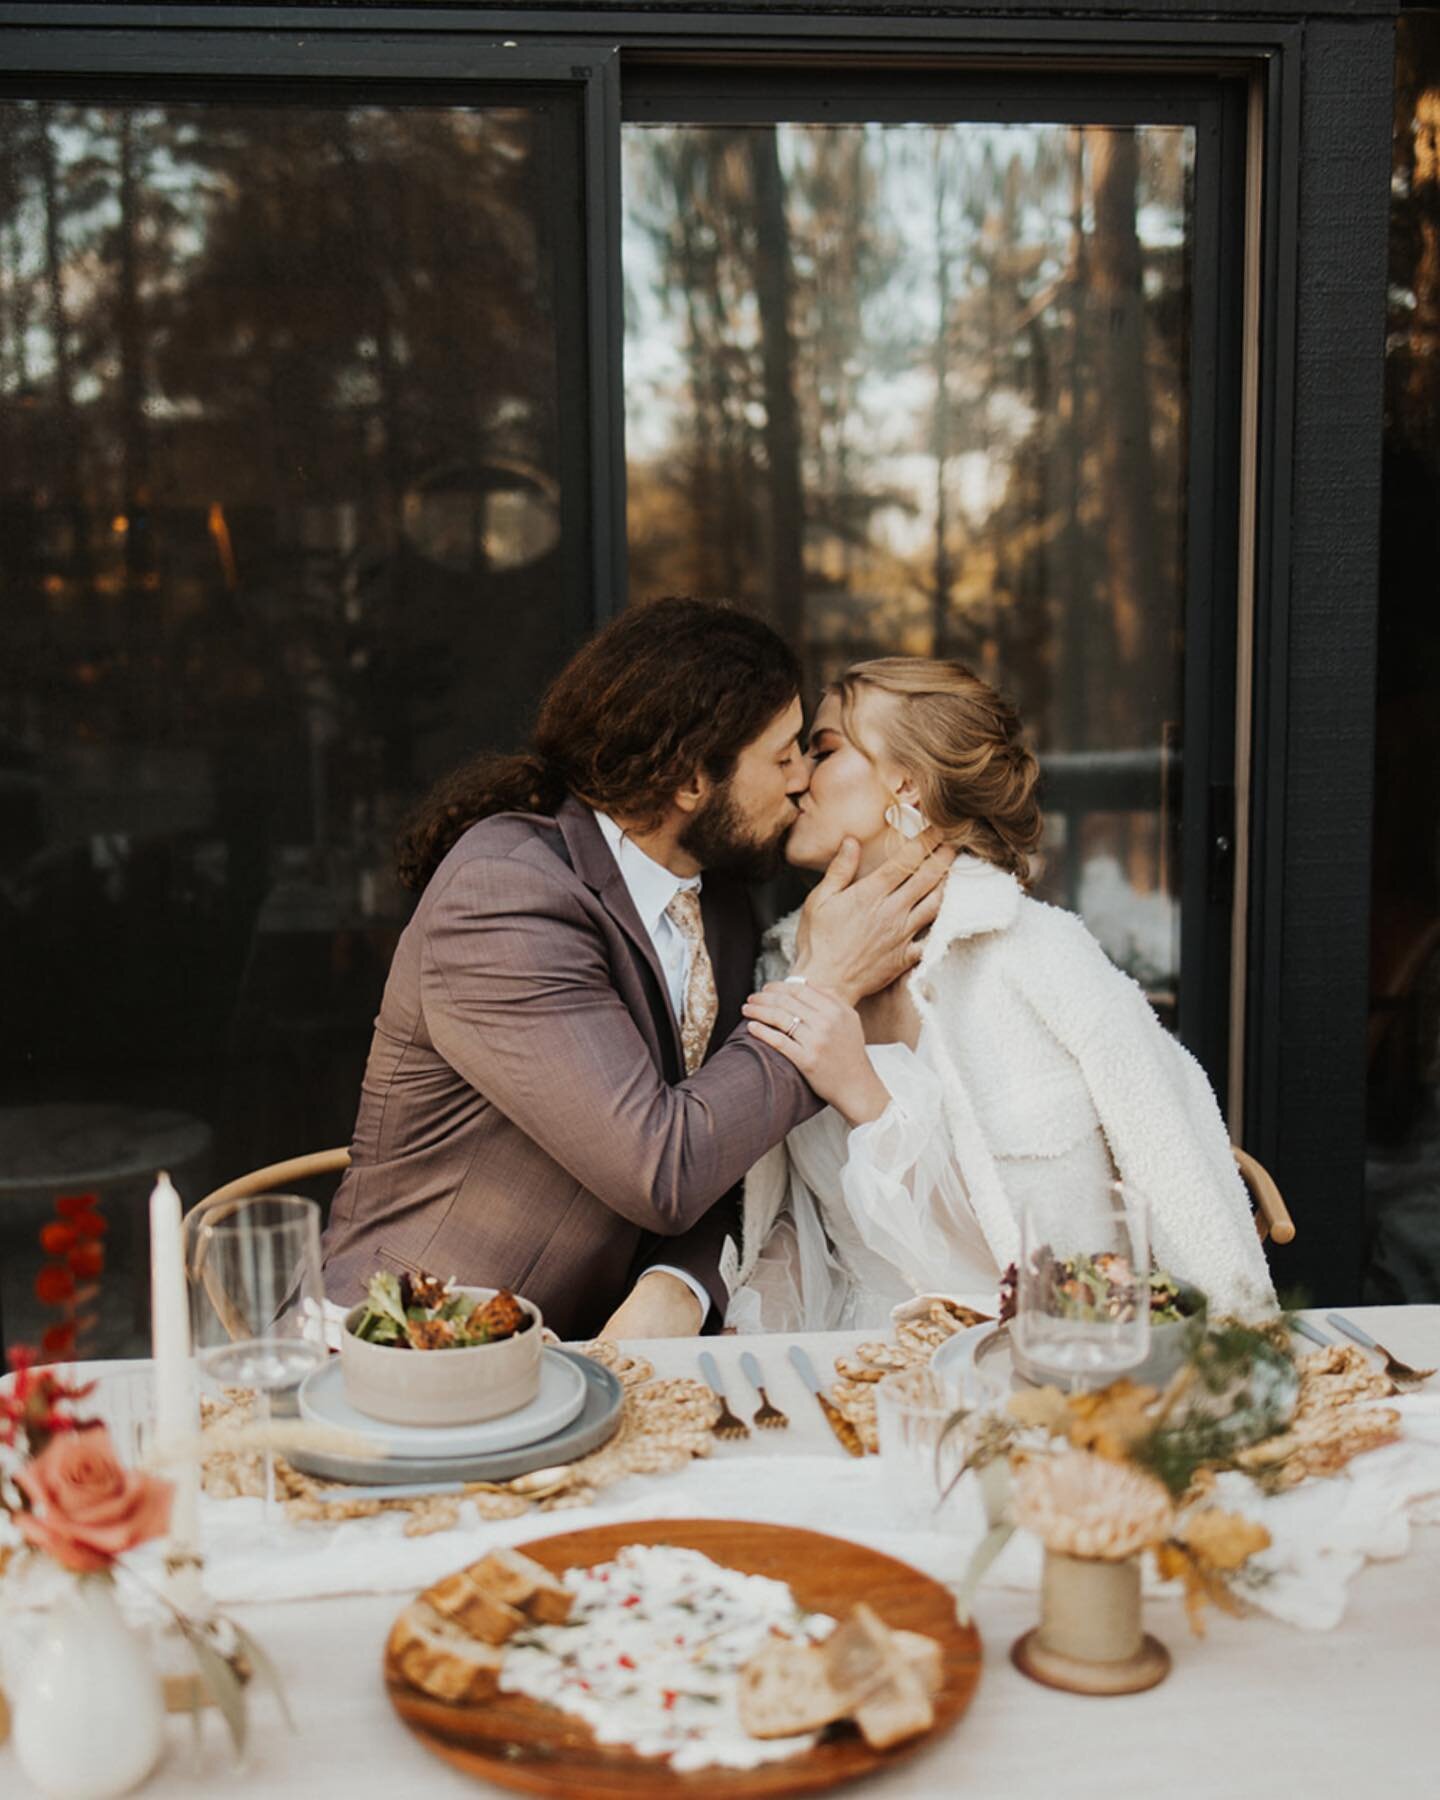 A moment for the sweetheart table🫶🏼

Featured rentals:
✨Light Wood Sweetheart Table
✨Wishbone Chairs 

We are obsessed with how @mountainesquewed &amp; @farmtotablerentals styled our sweetheart table for this dreamy winter A-frame elopement!🤩

PLA